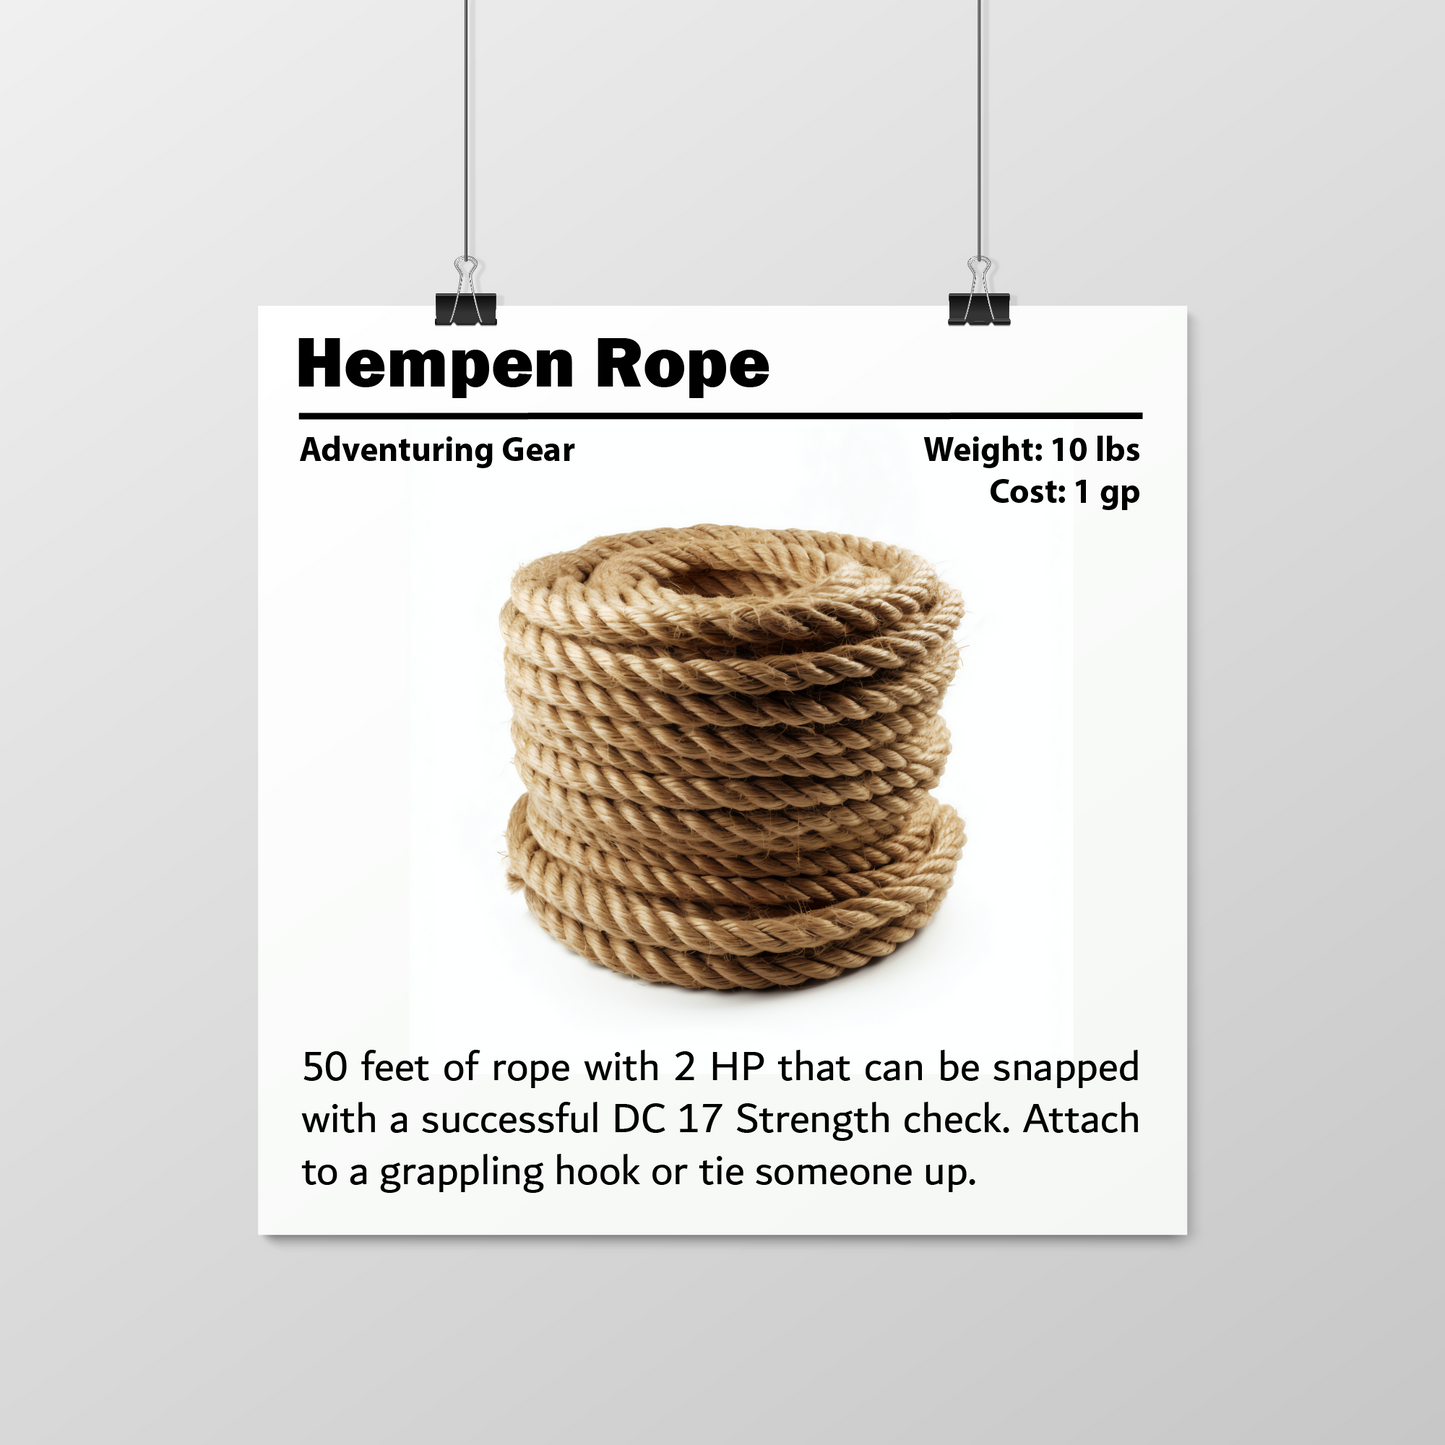 DnD Poster, DnD Hempen Rope Poster, D&D Poster, Dungeon Master Gift, Tabletop Game Room Decor, Critical Role Poster, RPG Gamer Gift